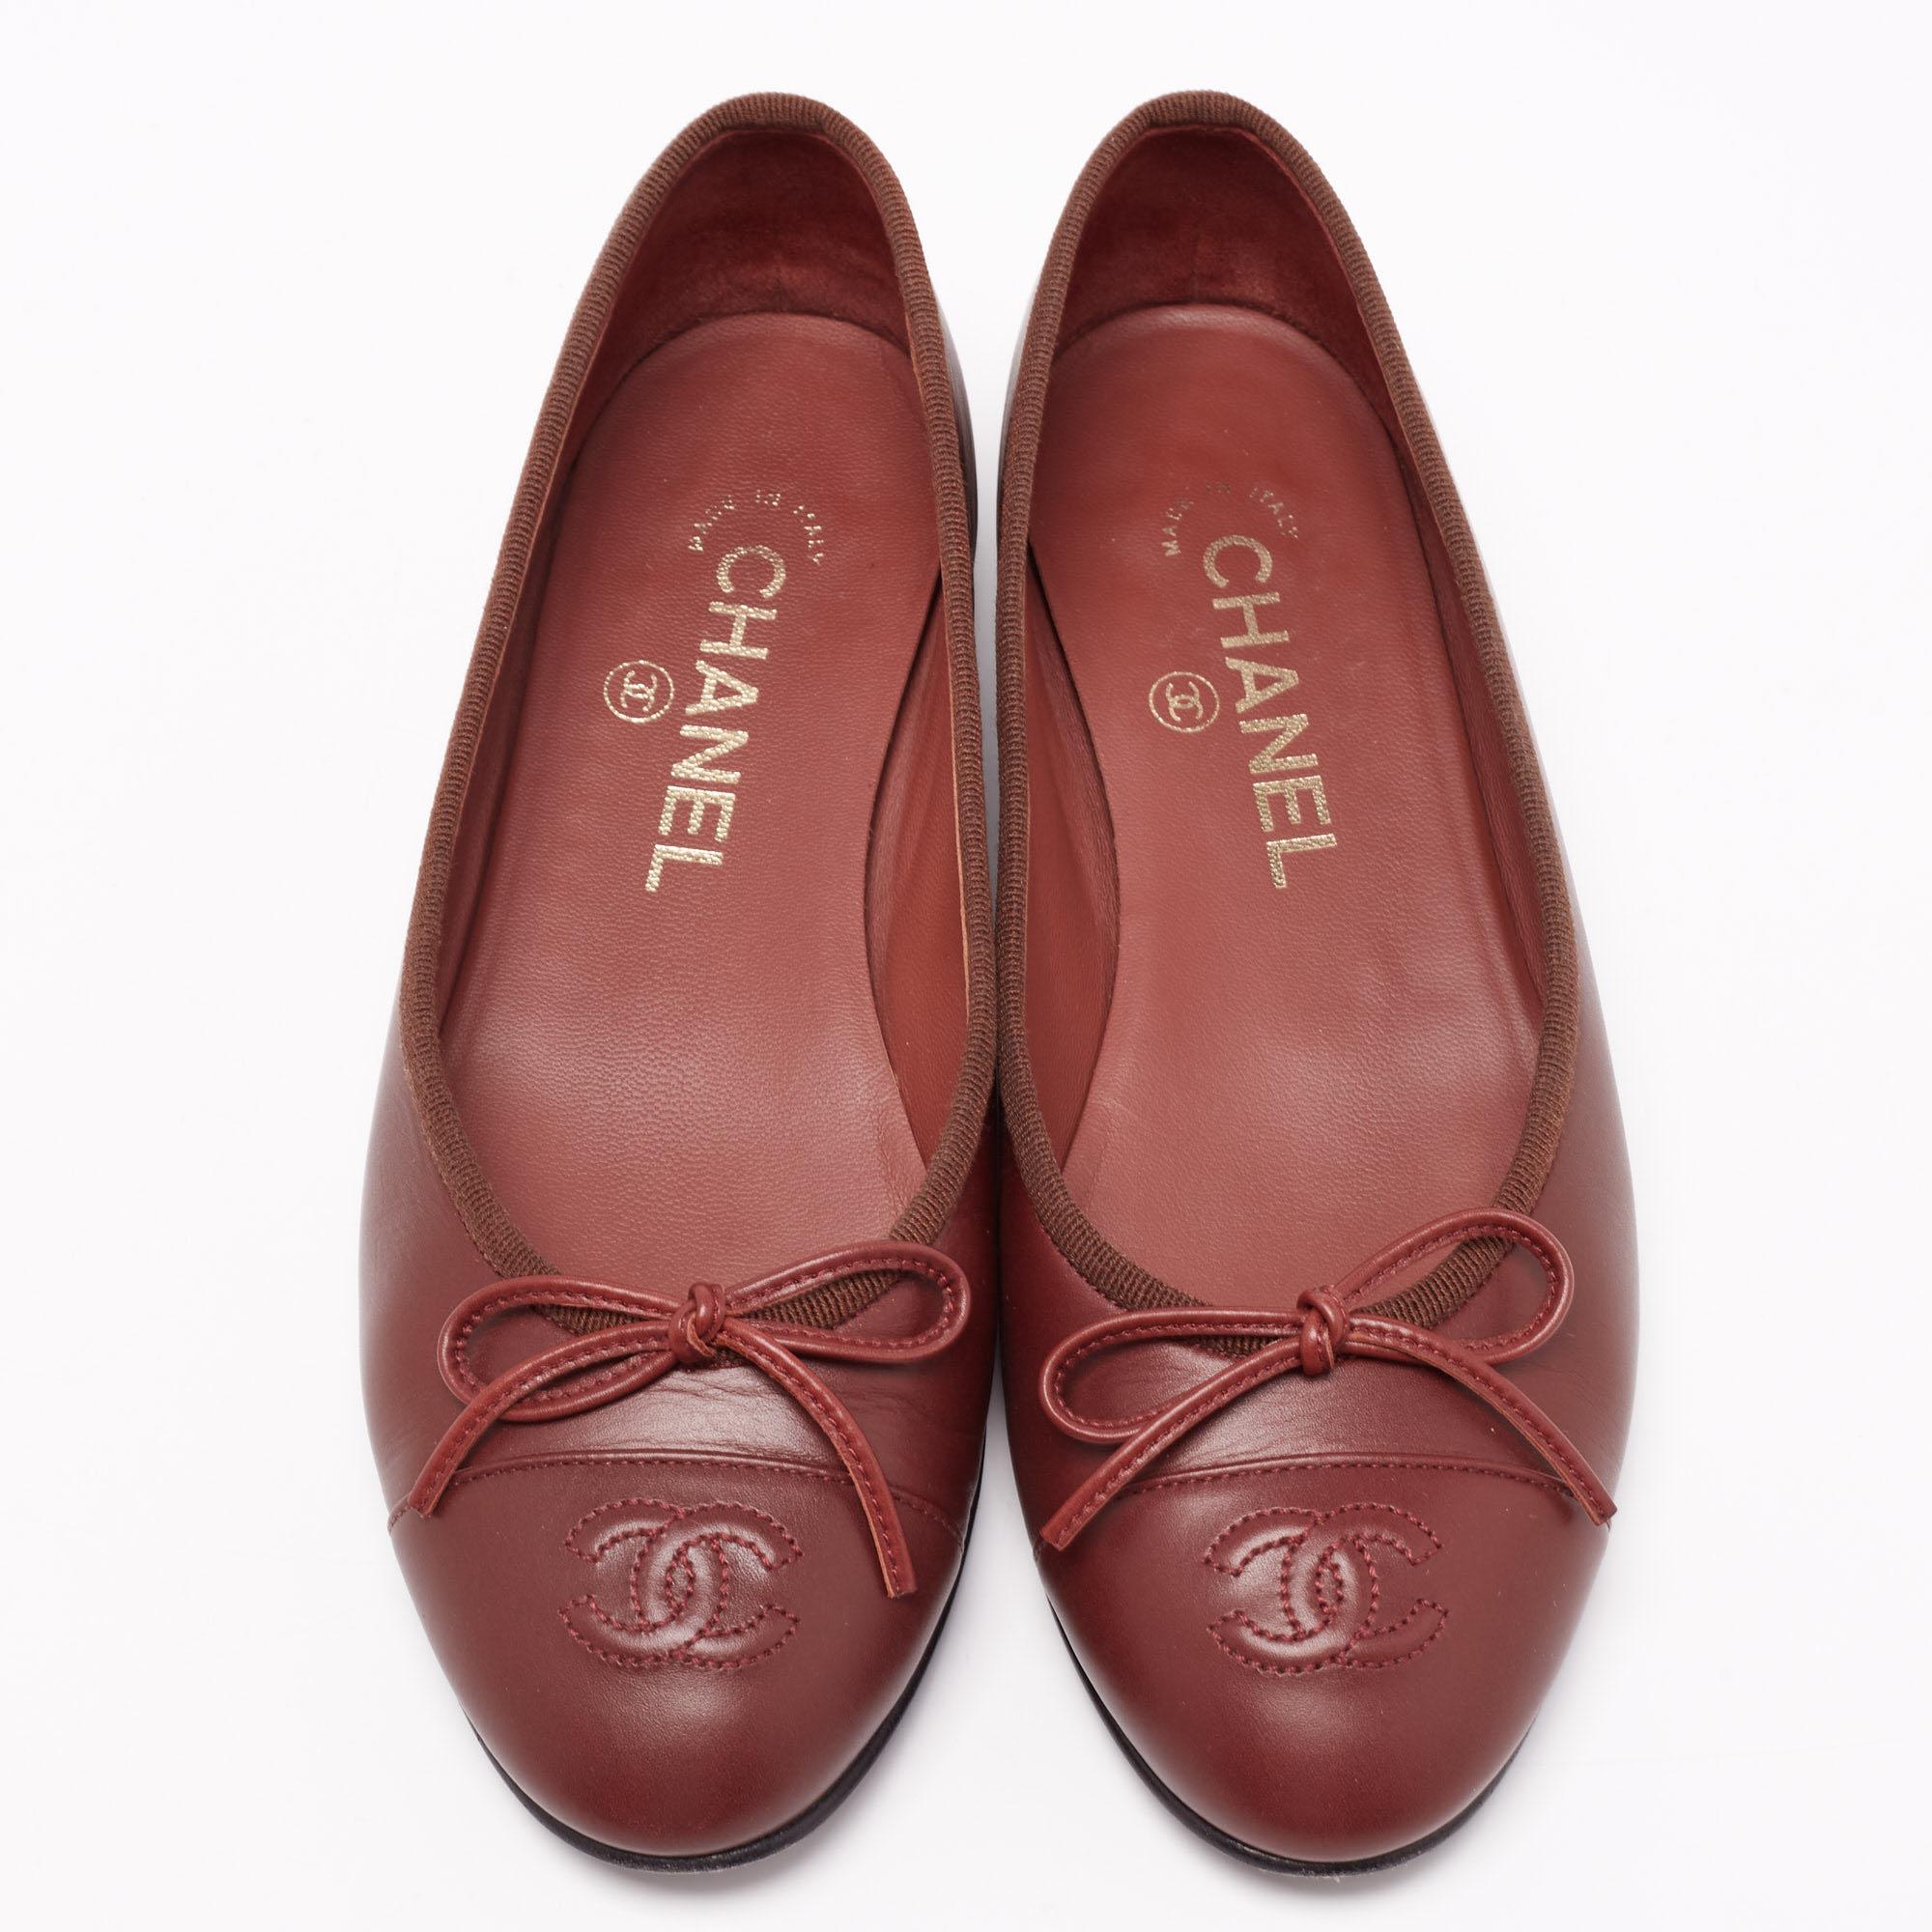 These minimal Chanel ballet flats are perfect for long hours of use and just chic enough to wear to work. Constructed using leather, these shoes feature leather cap toes with the signature CC detail and little bow detail for that distinct Chanel